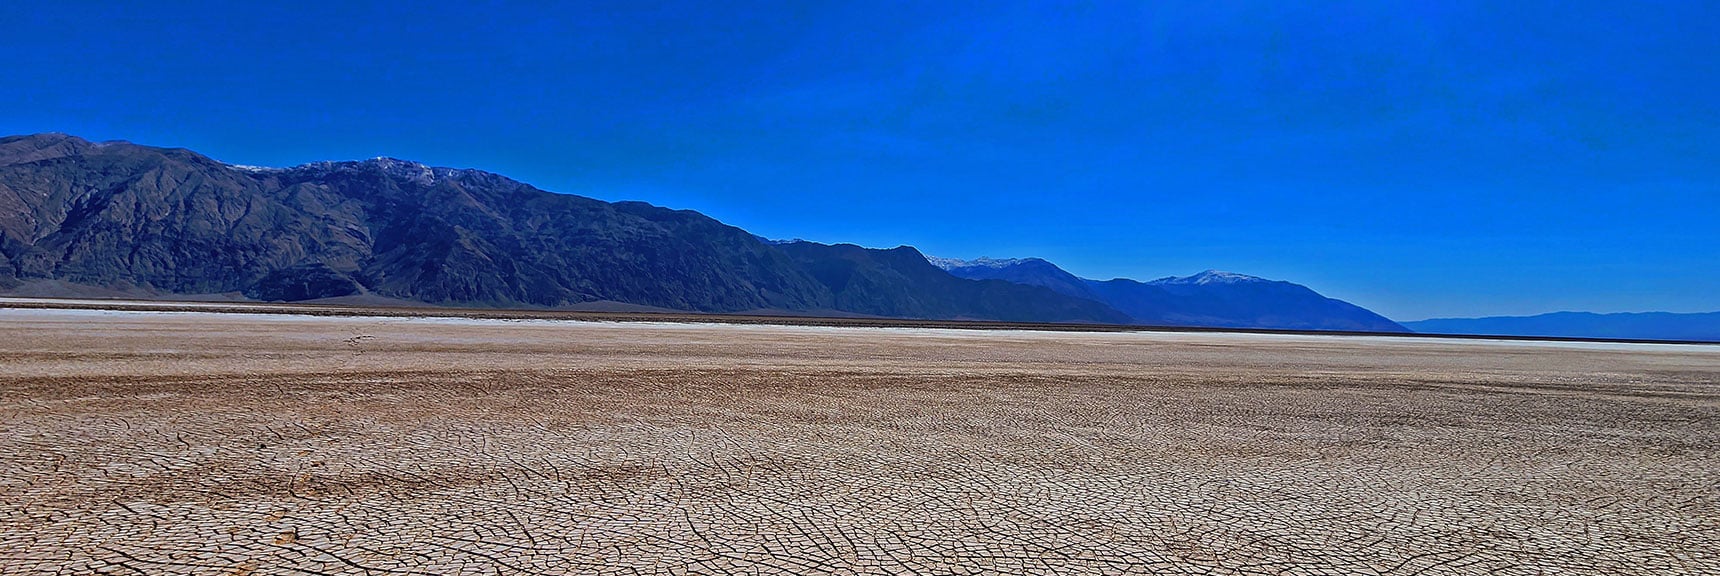 View Southeast from Mid Valley. Total Solitude Out Here. | Death Valley Crossing | Death Valley National Park, California | David Smith | LasVegasAreaTrails.com